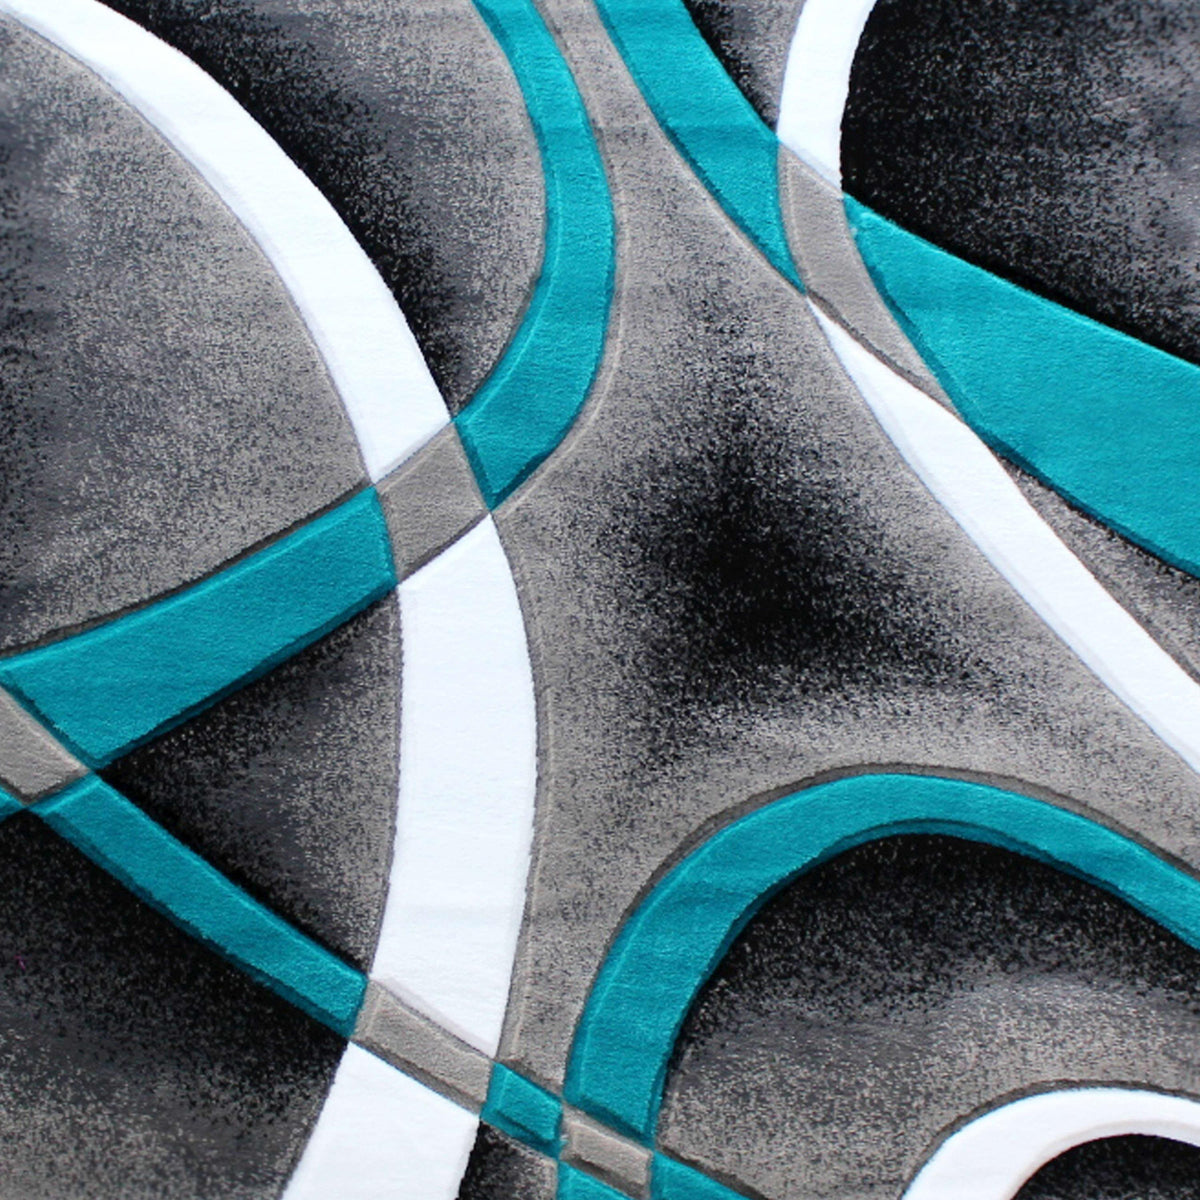 Turquoise,5' Round |#| Modern Ribboned Design High-Low Pile Abstract Area Rug in Turquoise - 5' x 5'